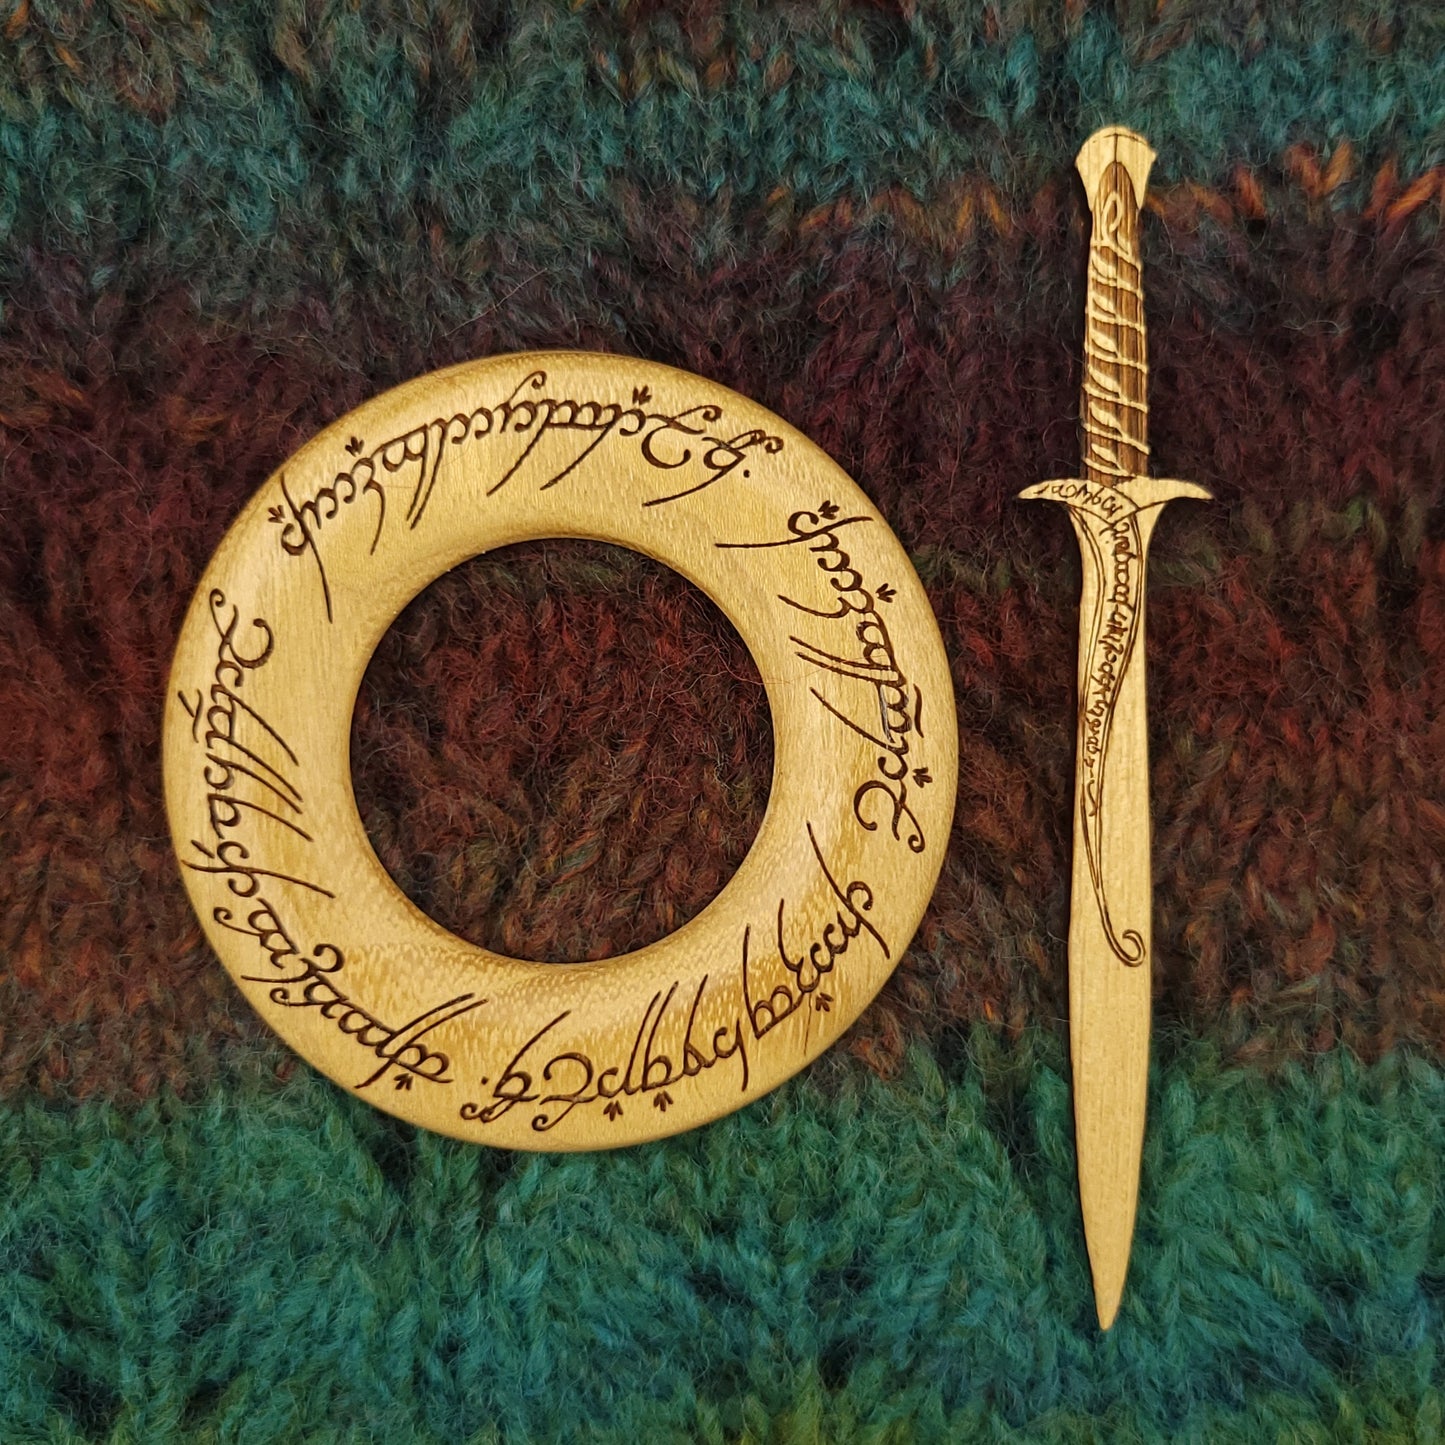 Black Locust Lord of the Rings One Ring Shawl Pin and Ring Set